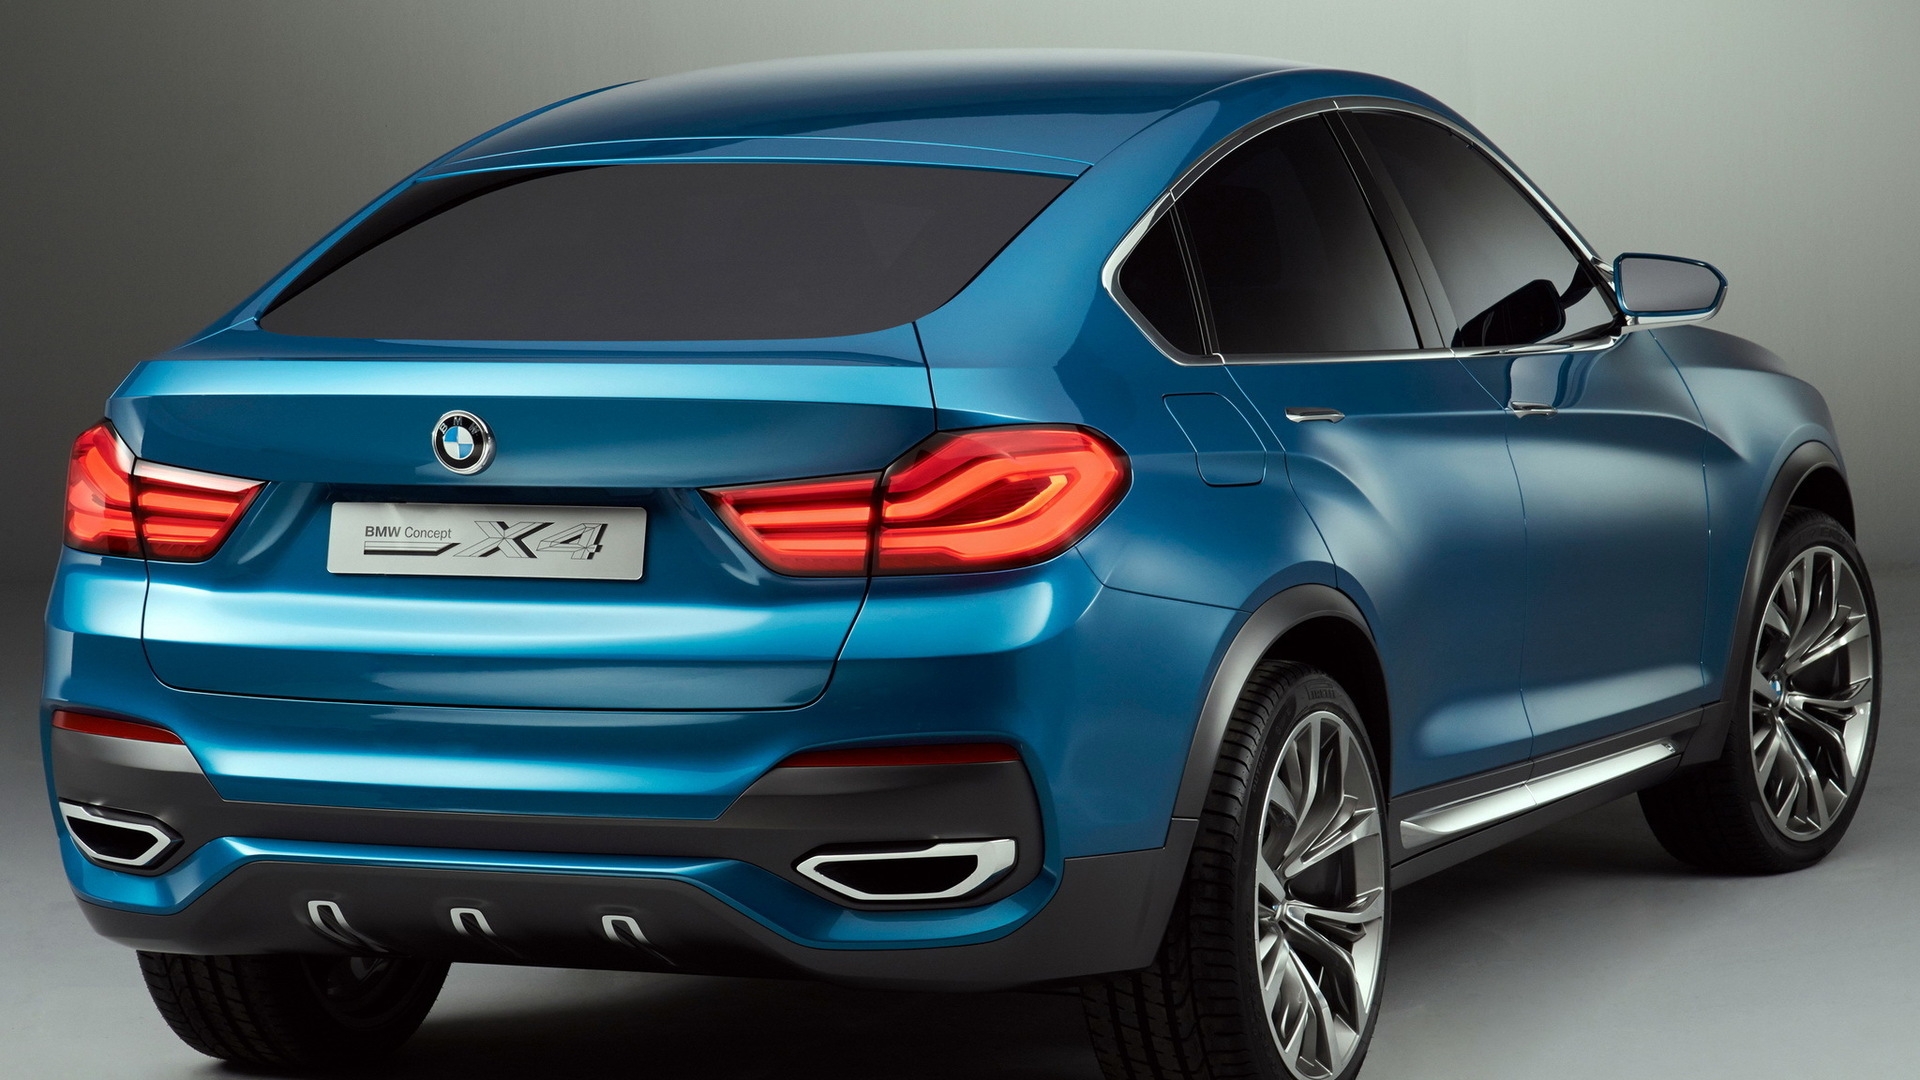 BMW X4 Back View for 1920 x 1080 HDTV 1080p resolution